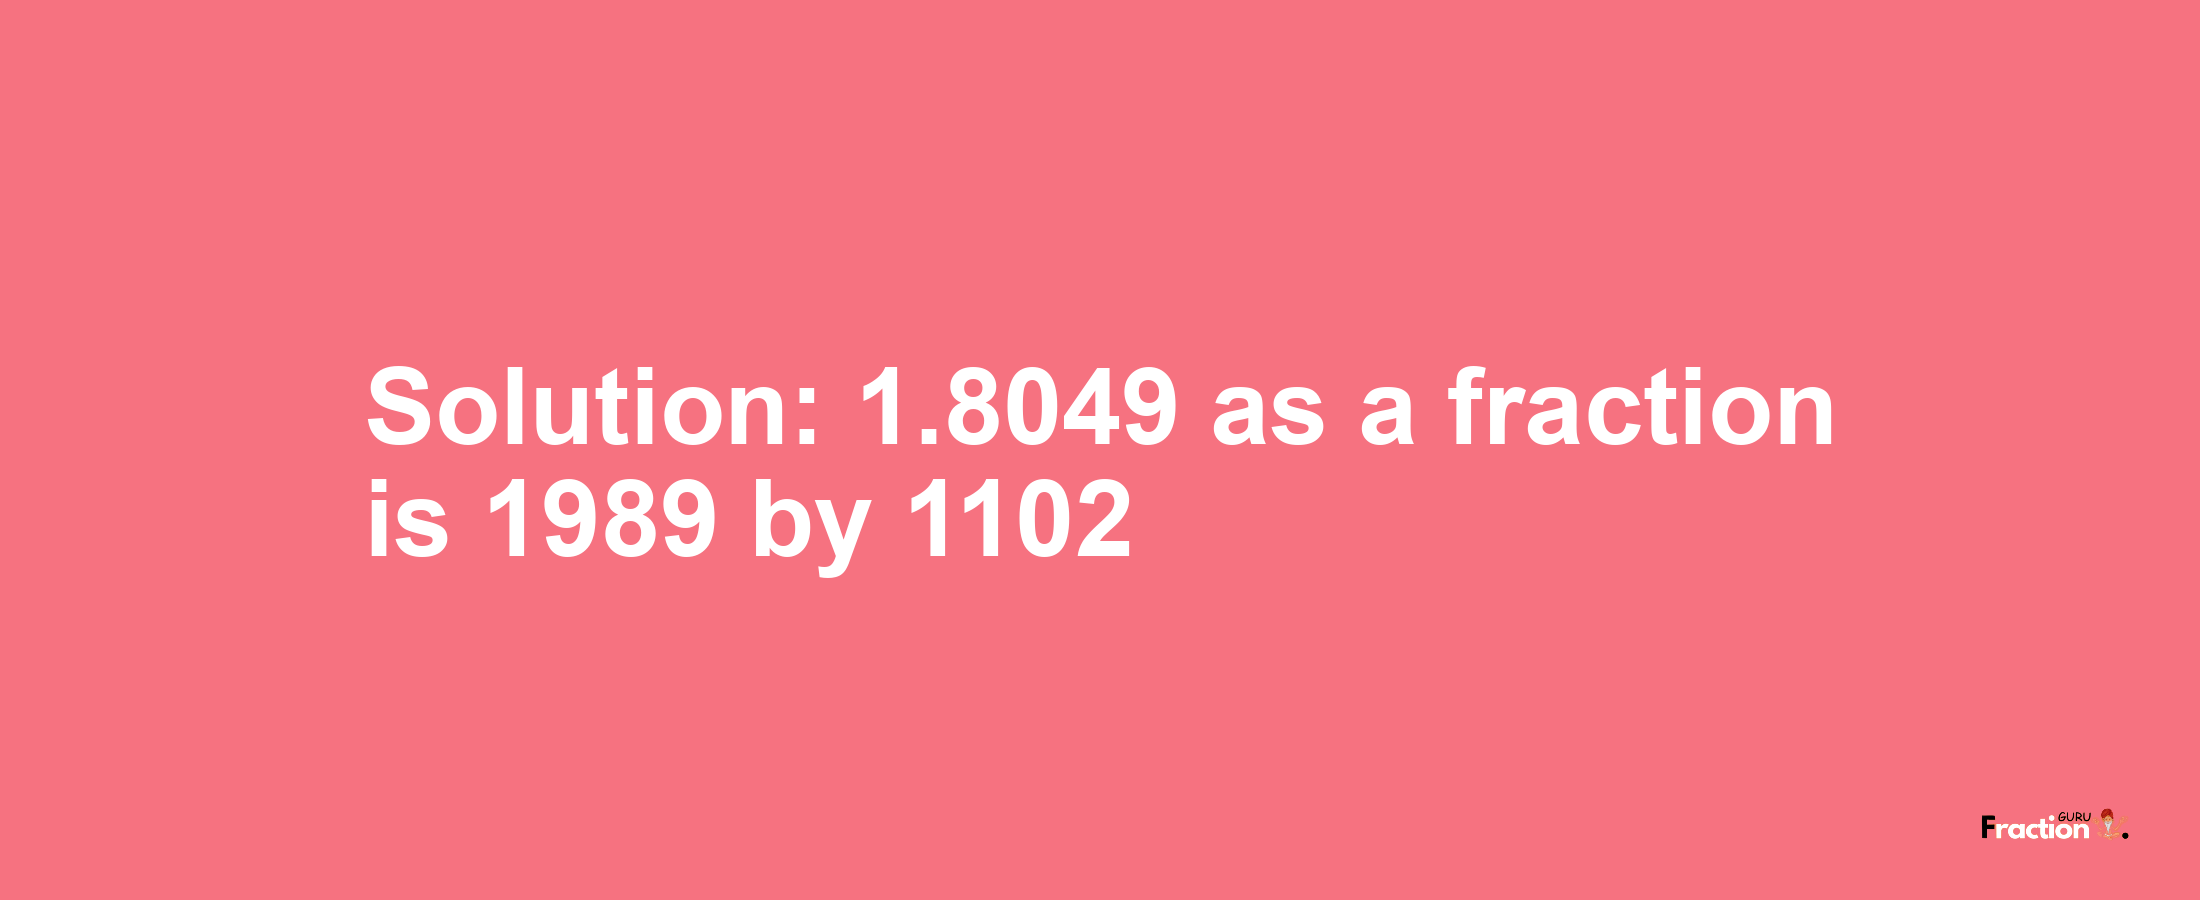 Solution:1.8049 as a fraction is 1989/1102